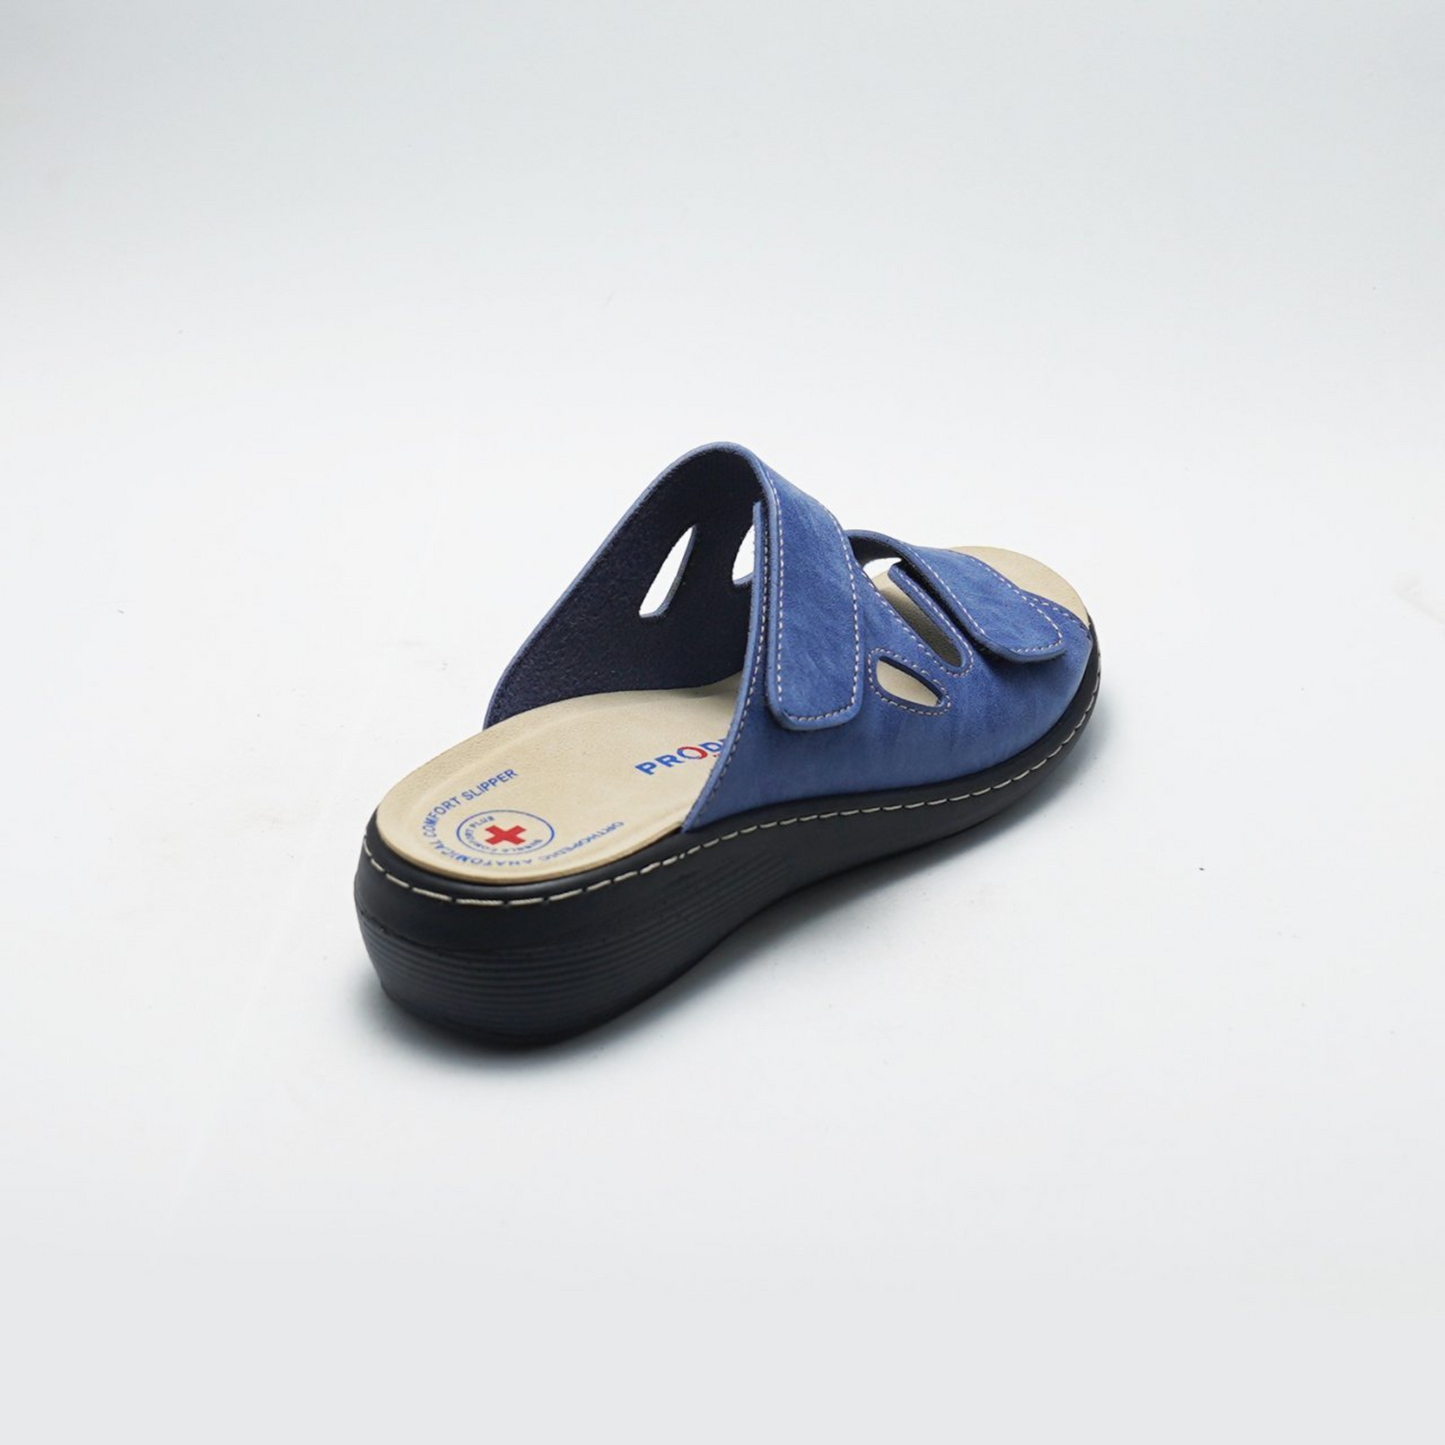 Anatomic Women Quality Slipper Large Strip Comfort - Removable Insole - Orthopedic Custom Insert - Medical Casual